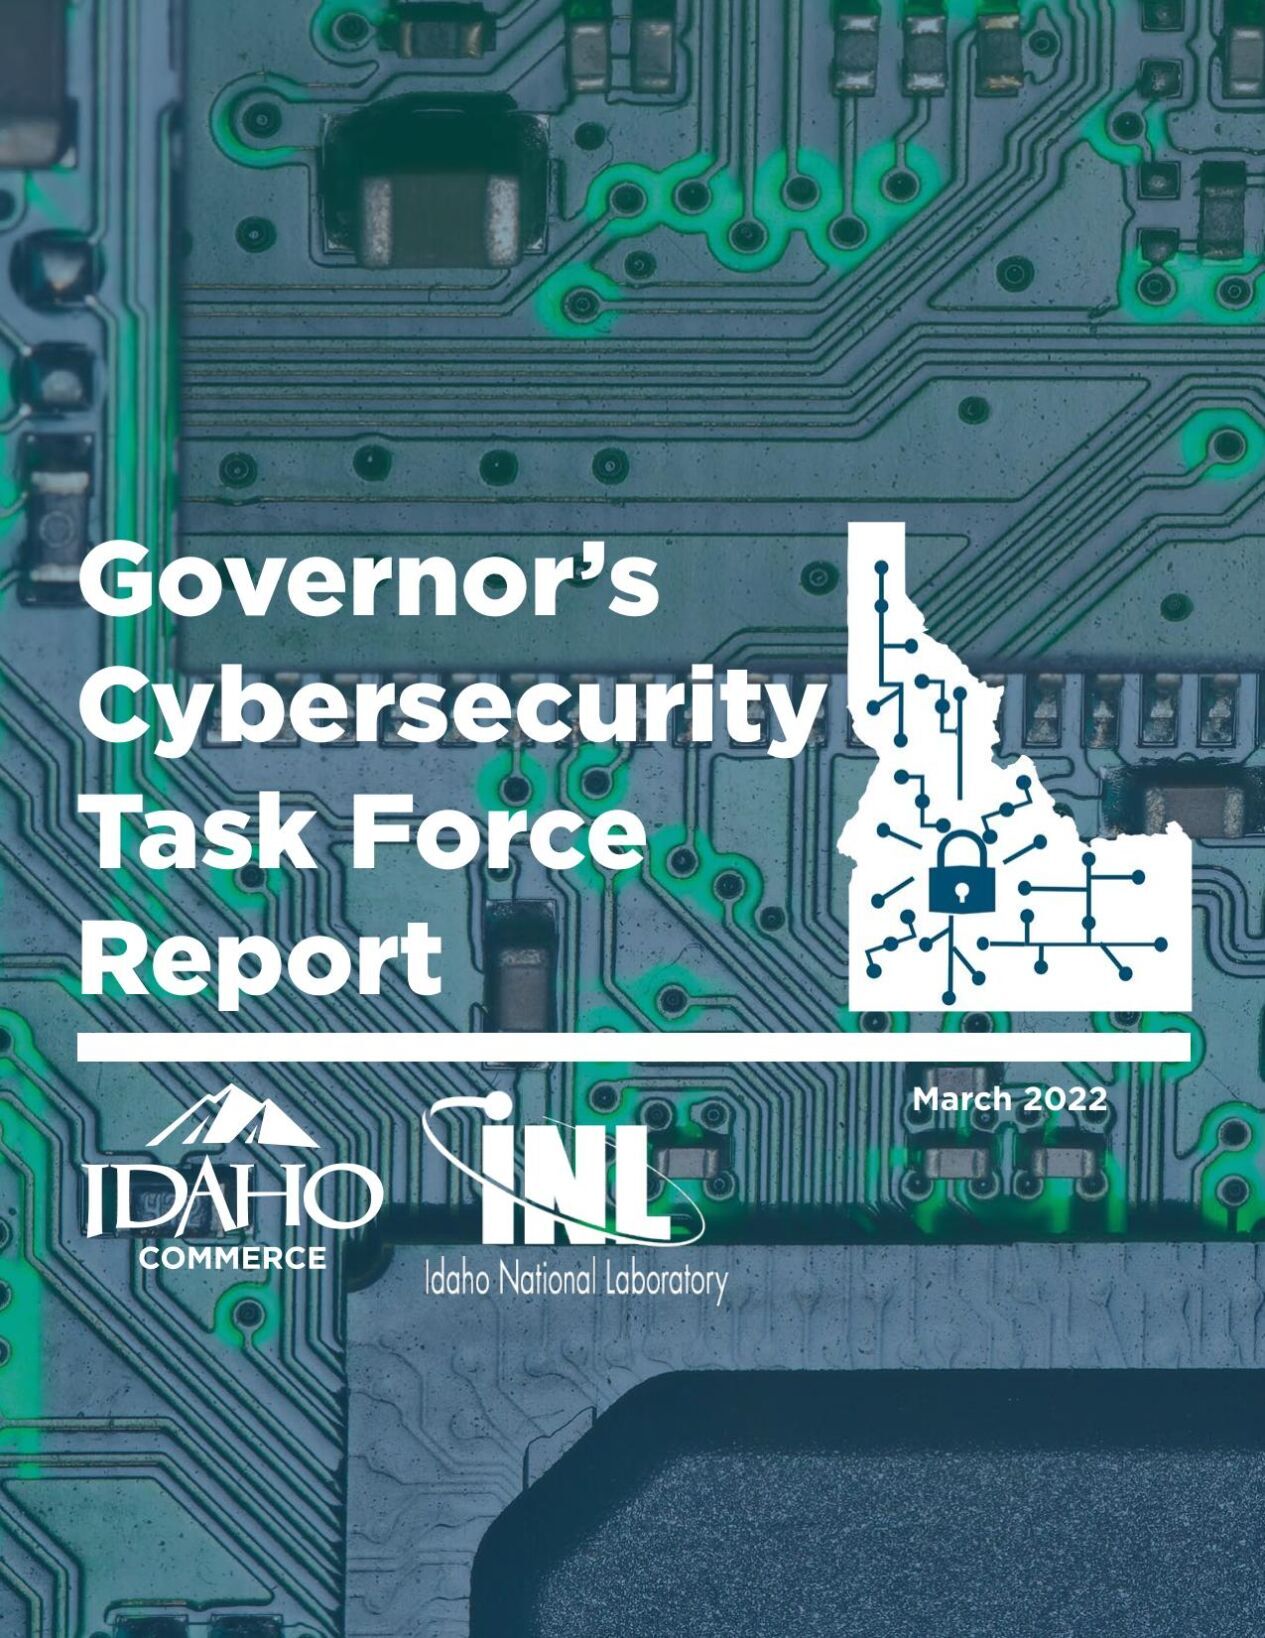 Governor's Cybersecurity Task Force Report